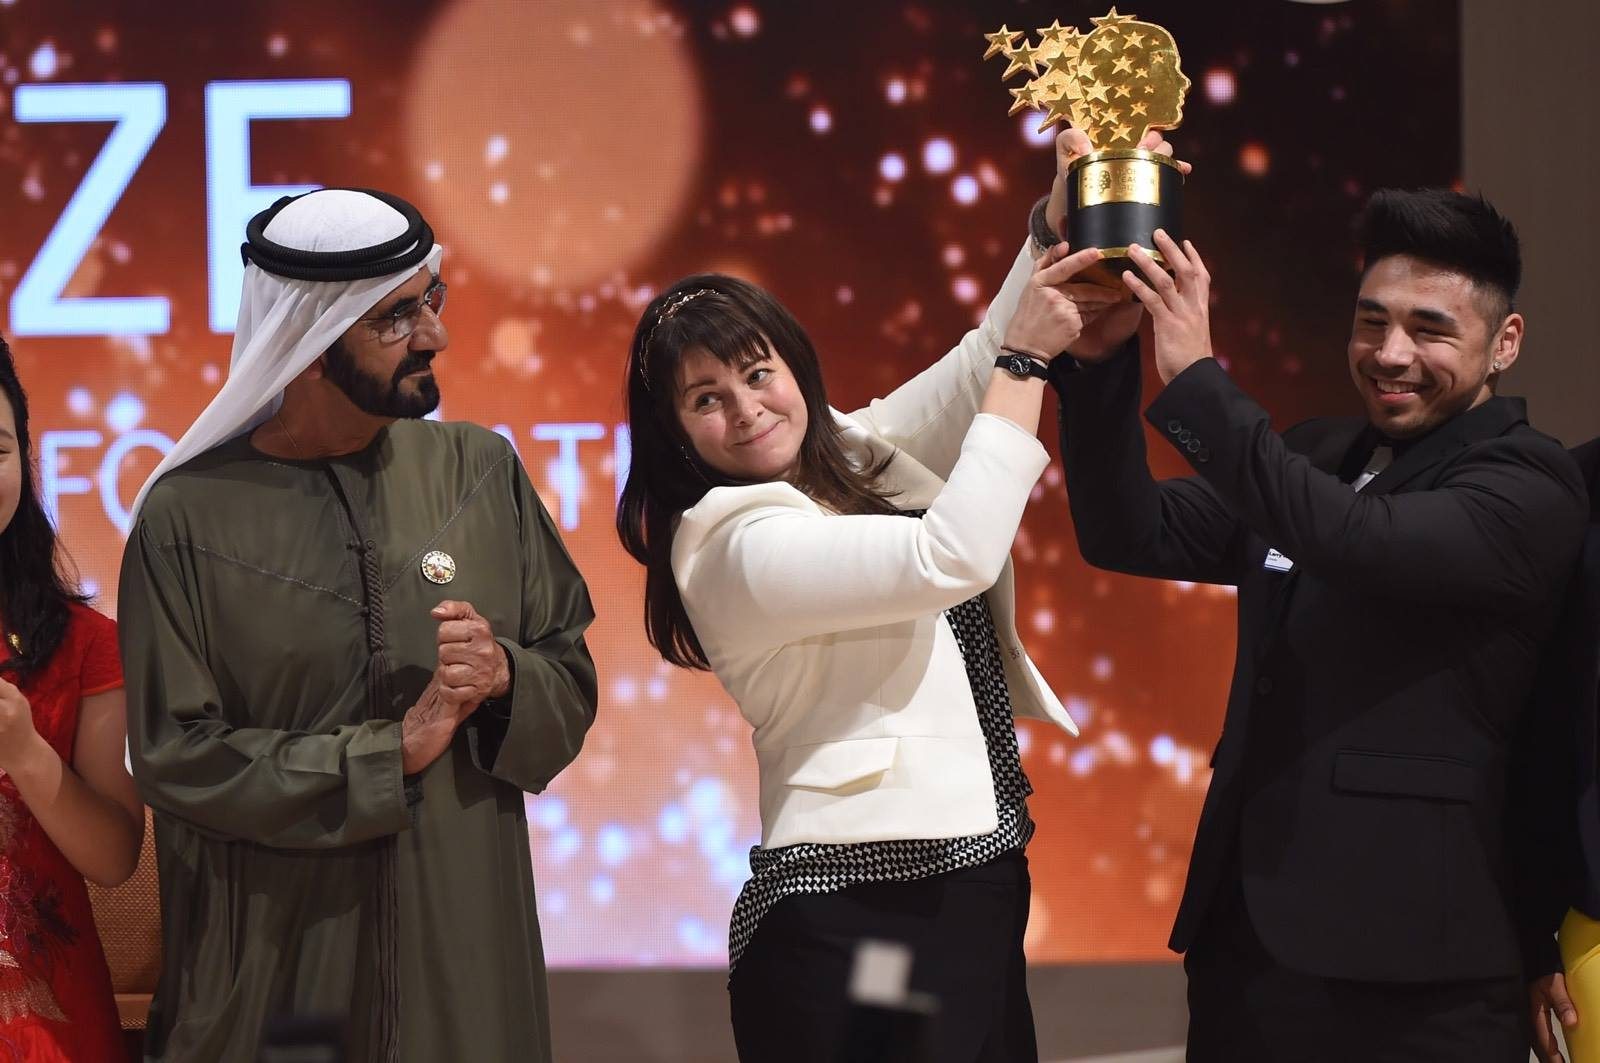 Teacher from Canadian Arctic wins global prize in Dubai